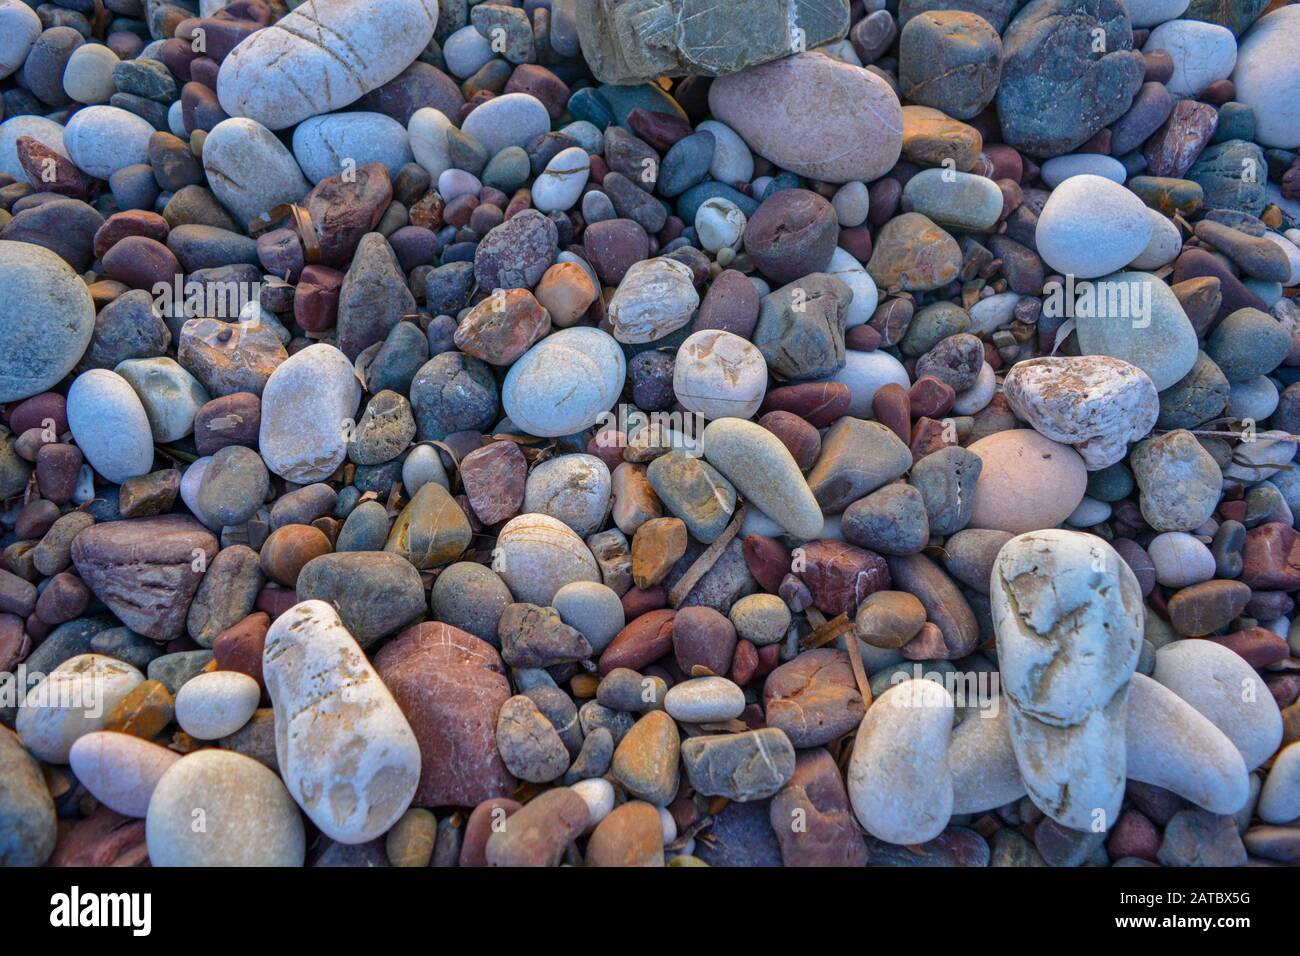 Beautiful background of round, colorful rocks. A peaceful scene from an uncontaminated beach on the ocean. Spherical, rolling stones on the sea shore Stock Photo